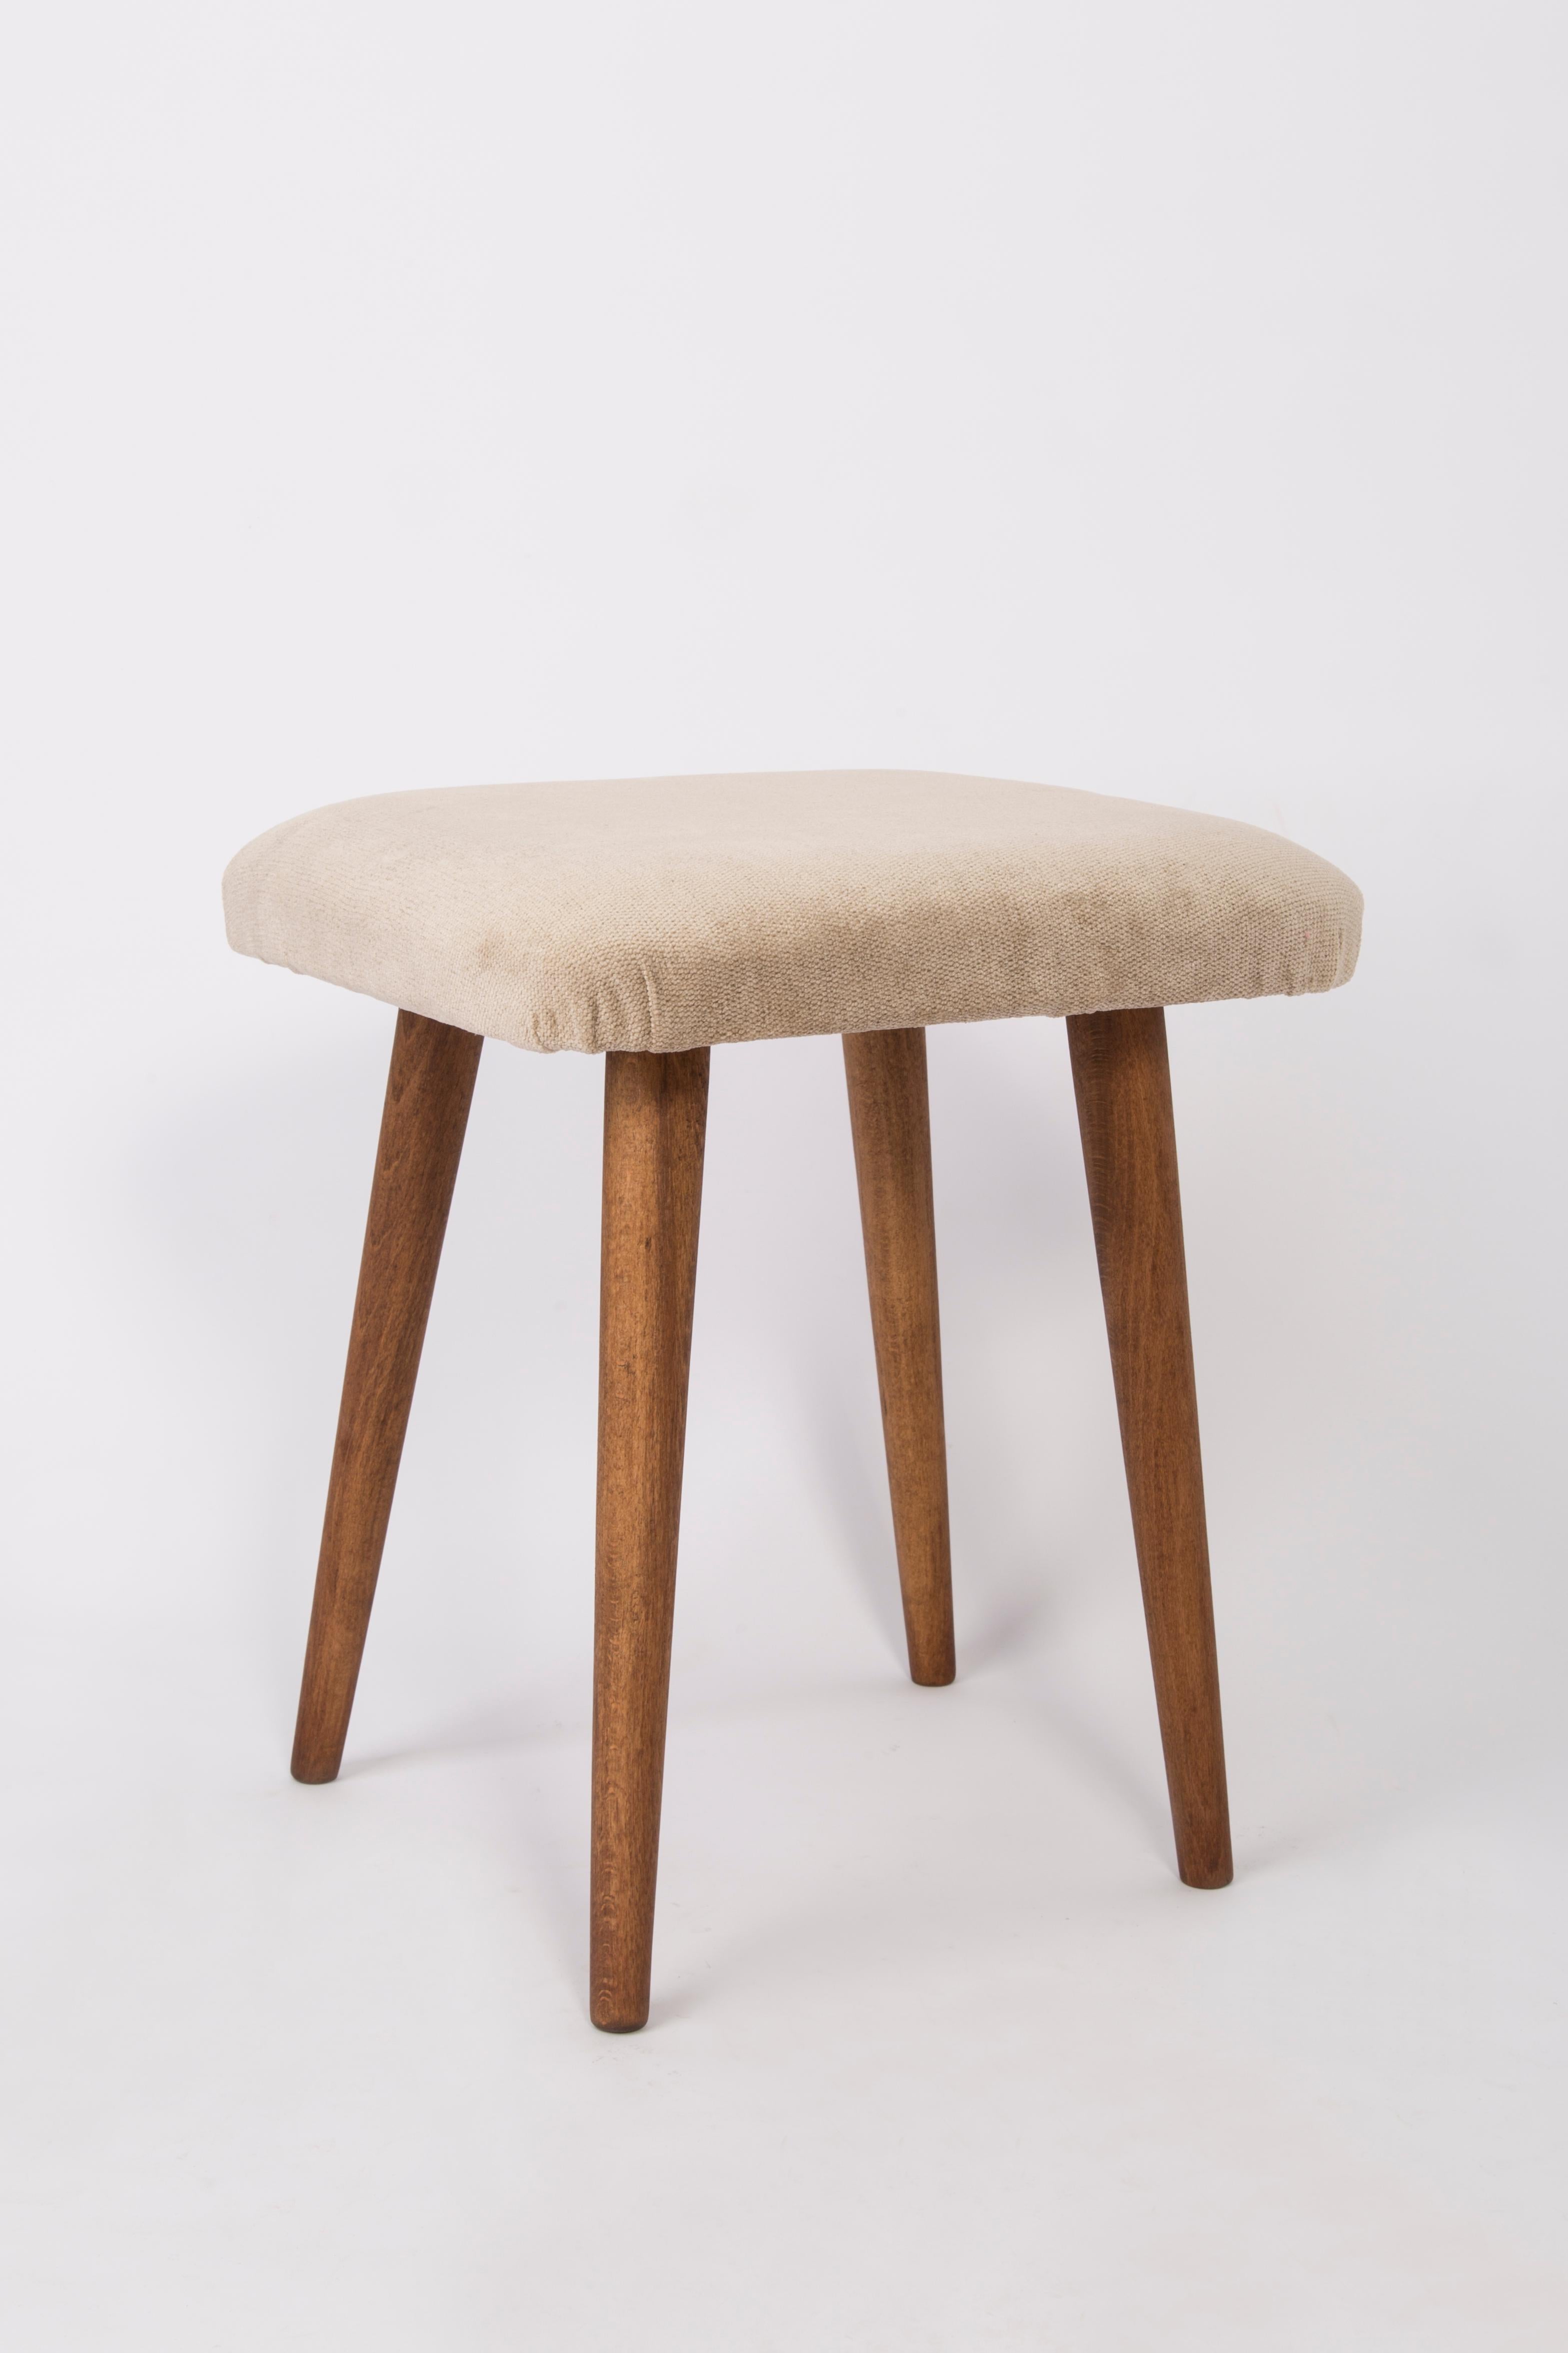 20th Century Pair of Beige Stools, 1960s For Sale